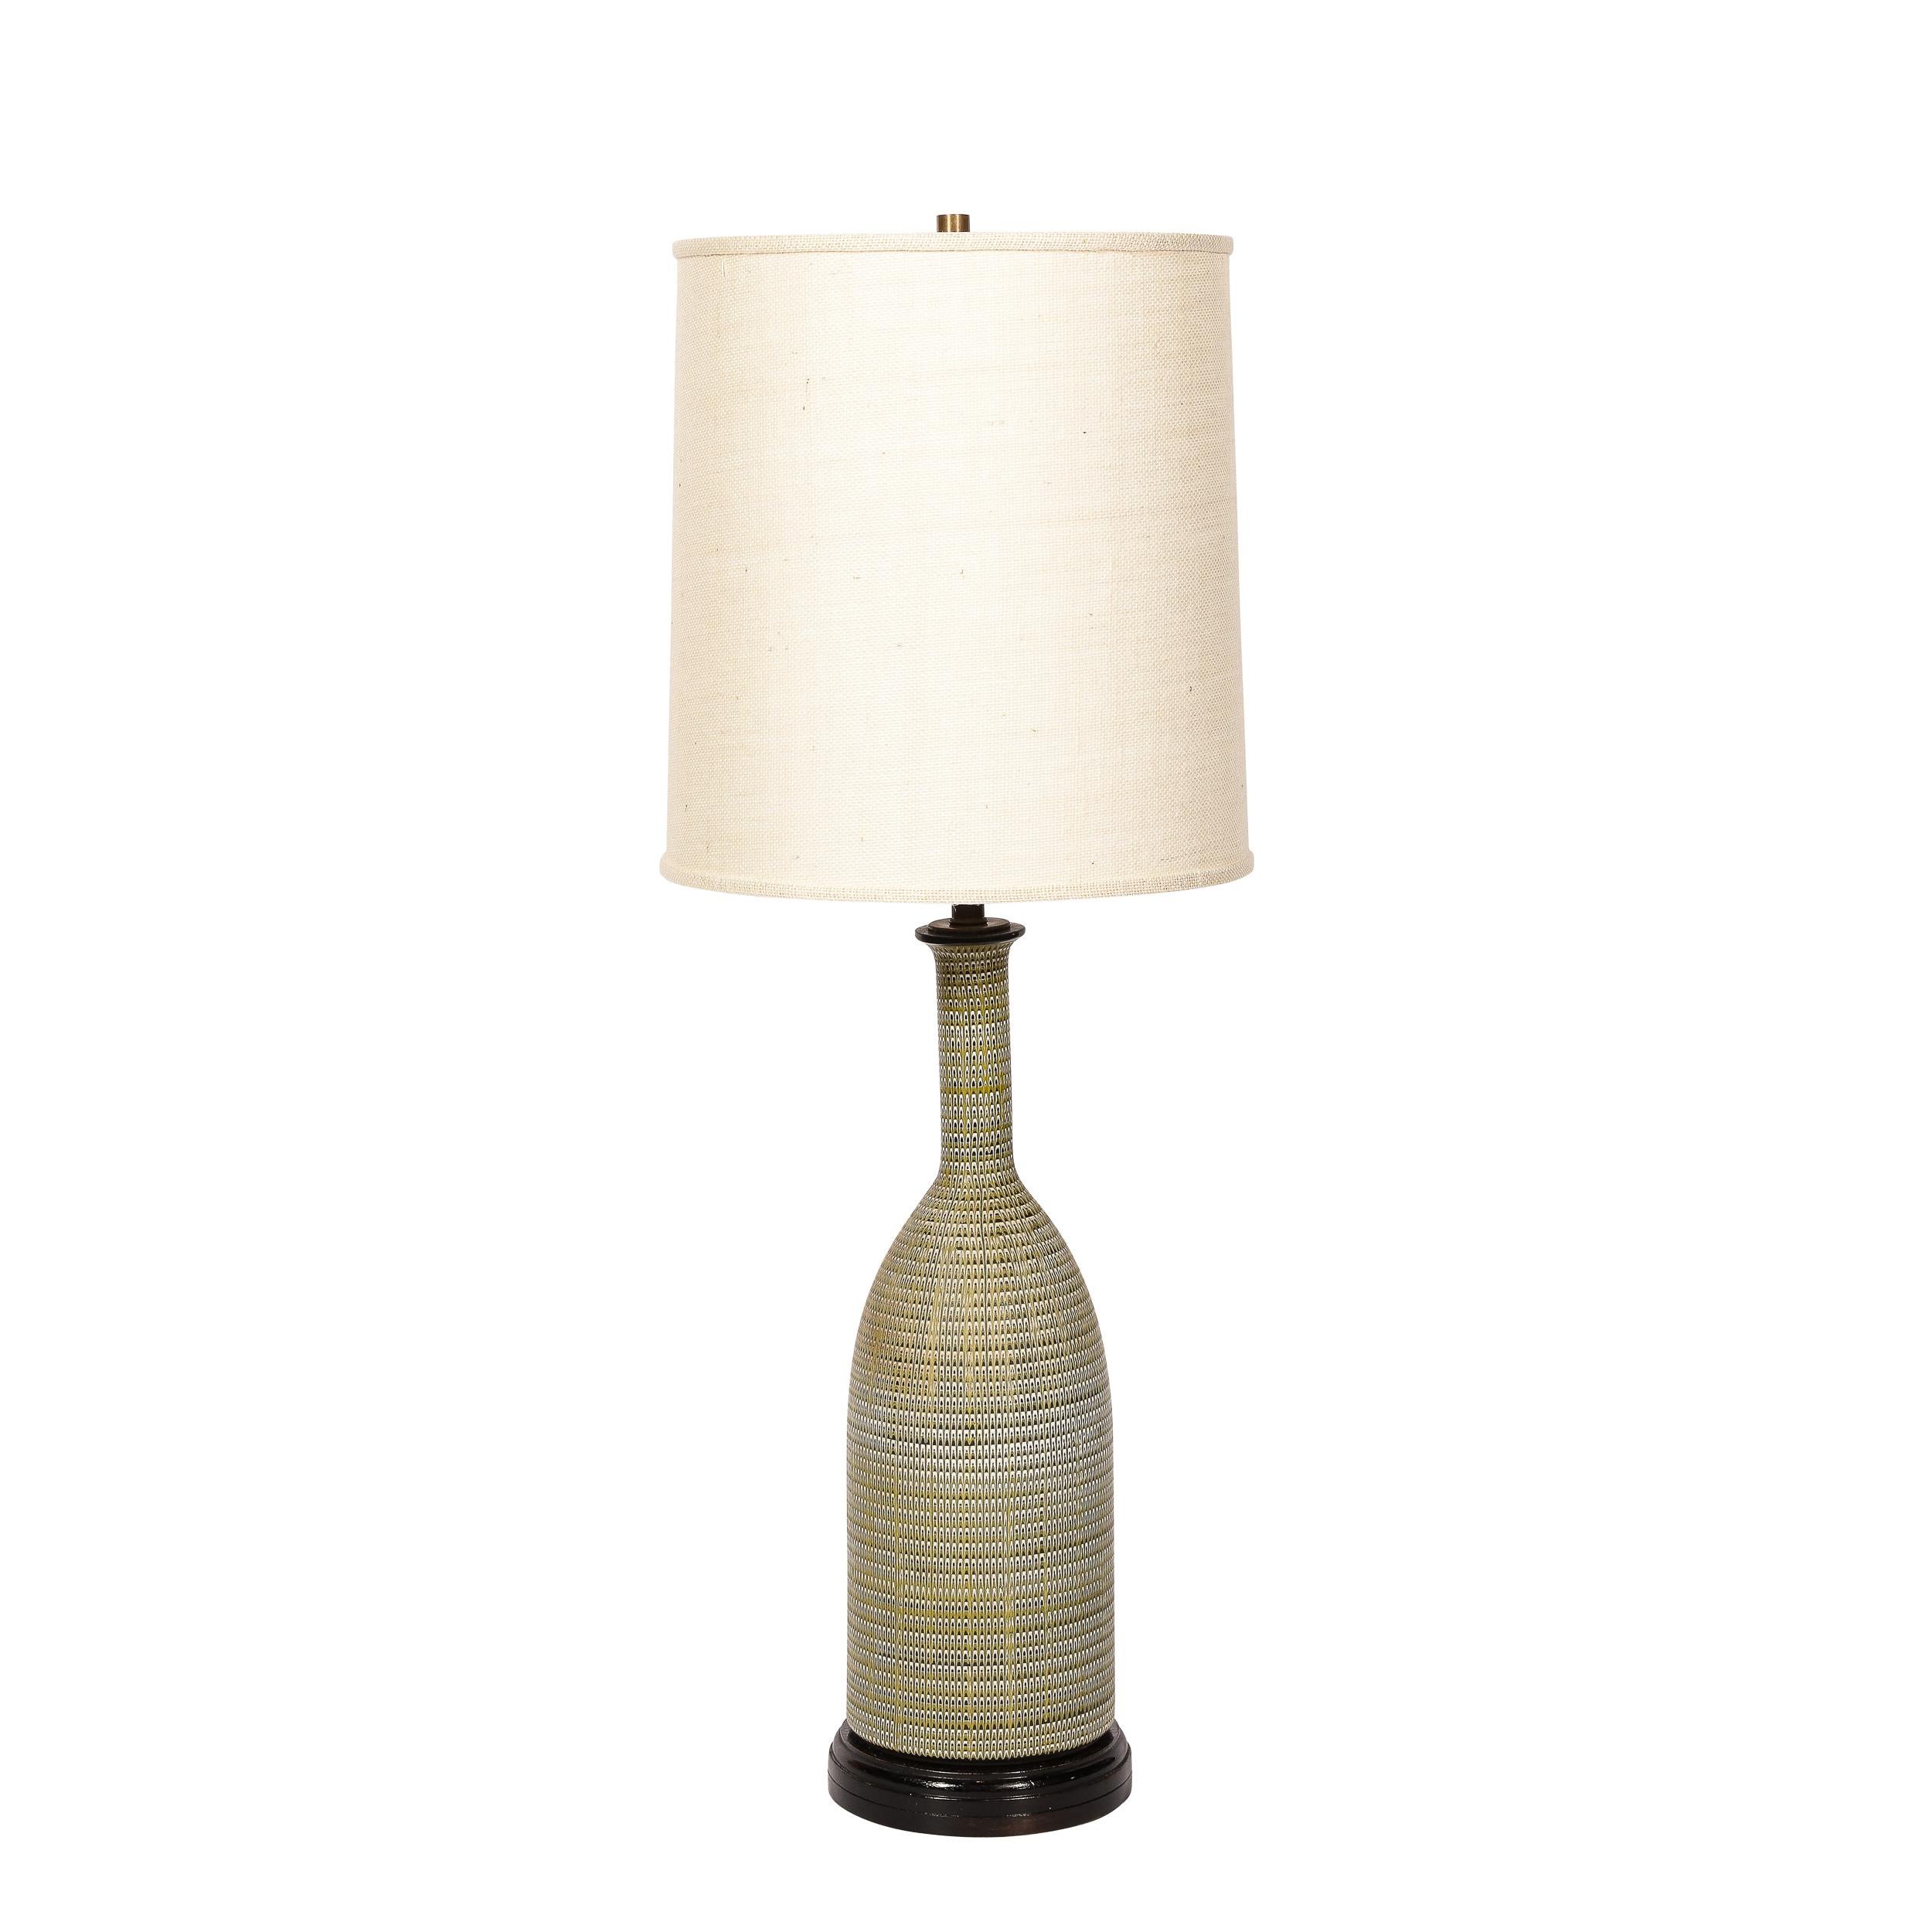 This refined pair of Mid-Century Modern table lamps were realized in the United States circa 1960. They feature conical bodies with slender elongated necks and brass fittings. The bodies of these ceramic lamps offers a sophisticated olive background